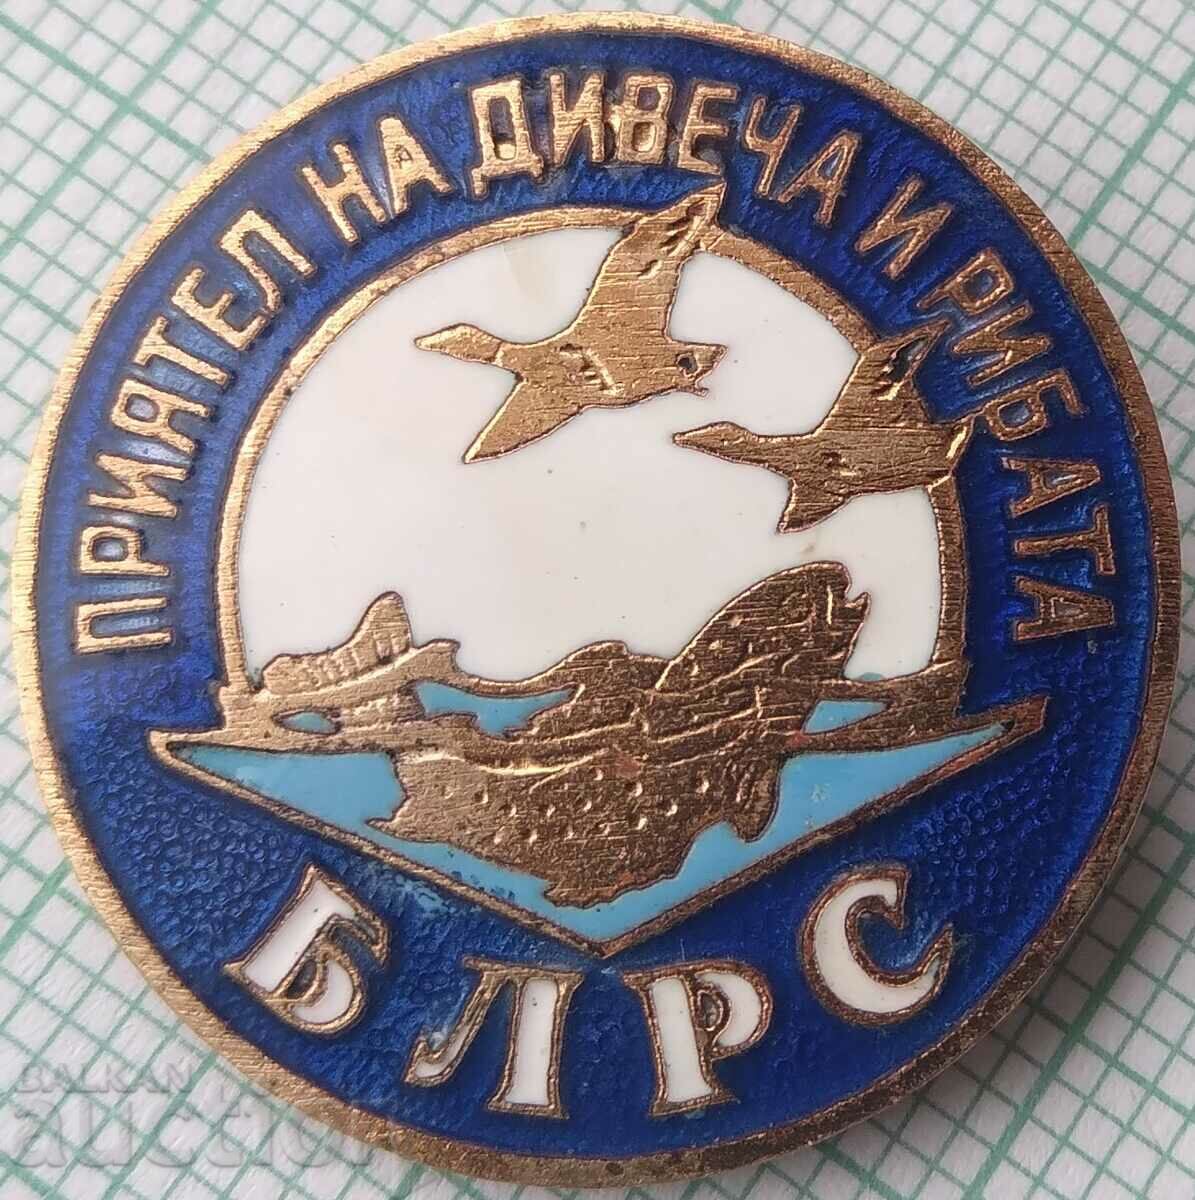 15729 Badge - BLRS Friend of game and fish - enamel